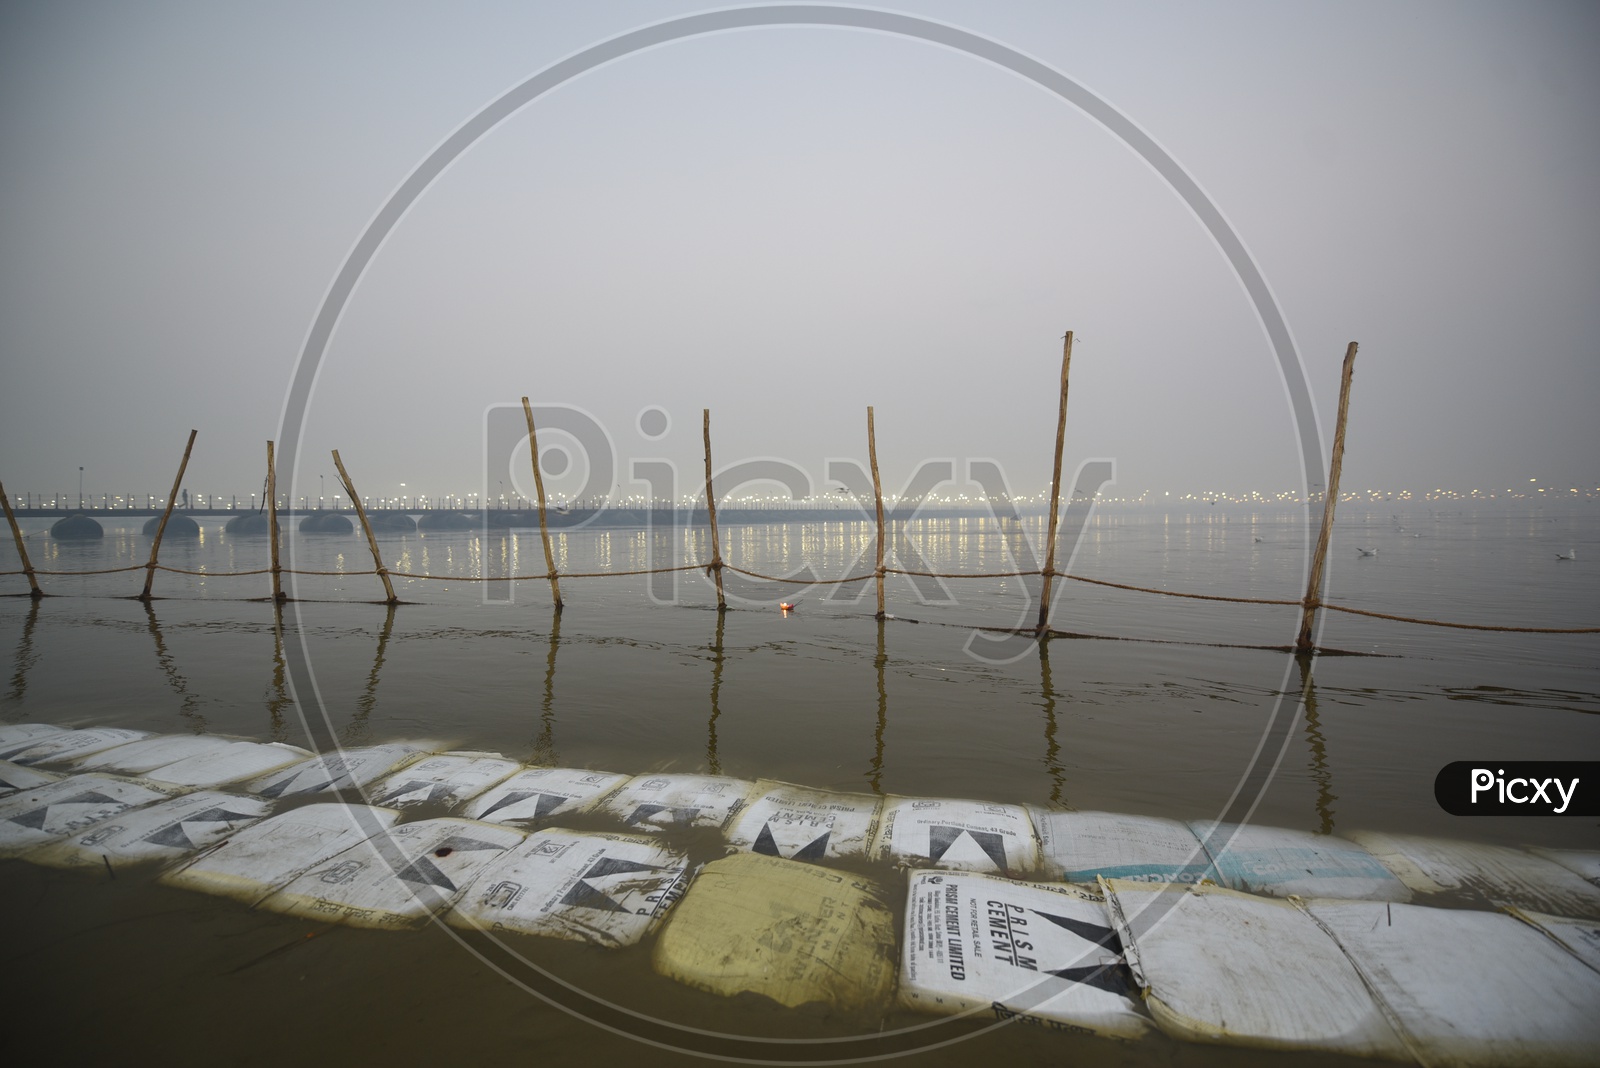 Barricades Arranged In River For  Devotees To Take Bath In River at Kumbh Mela